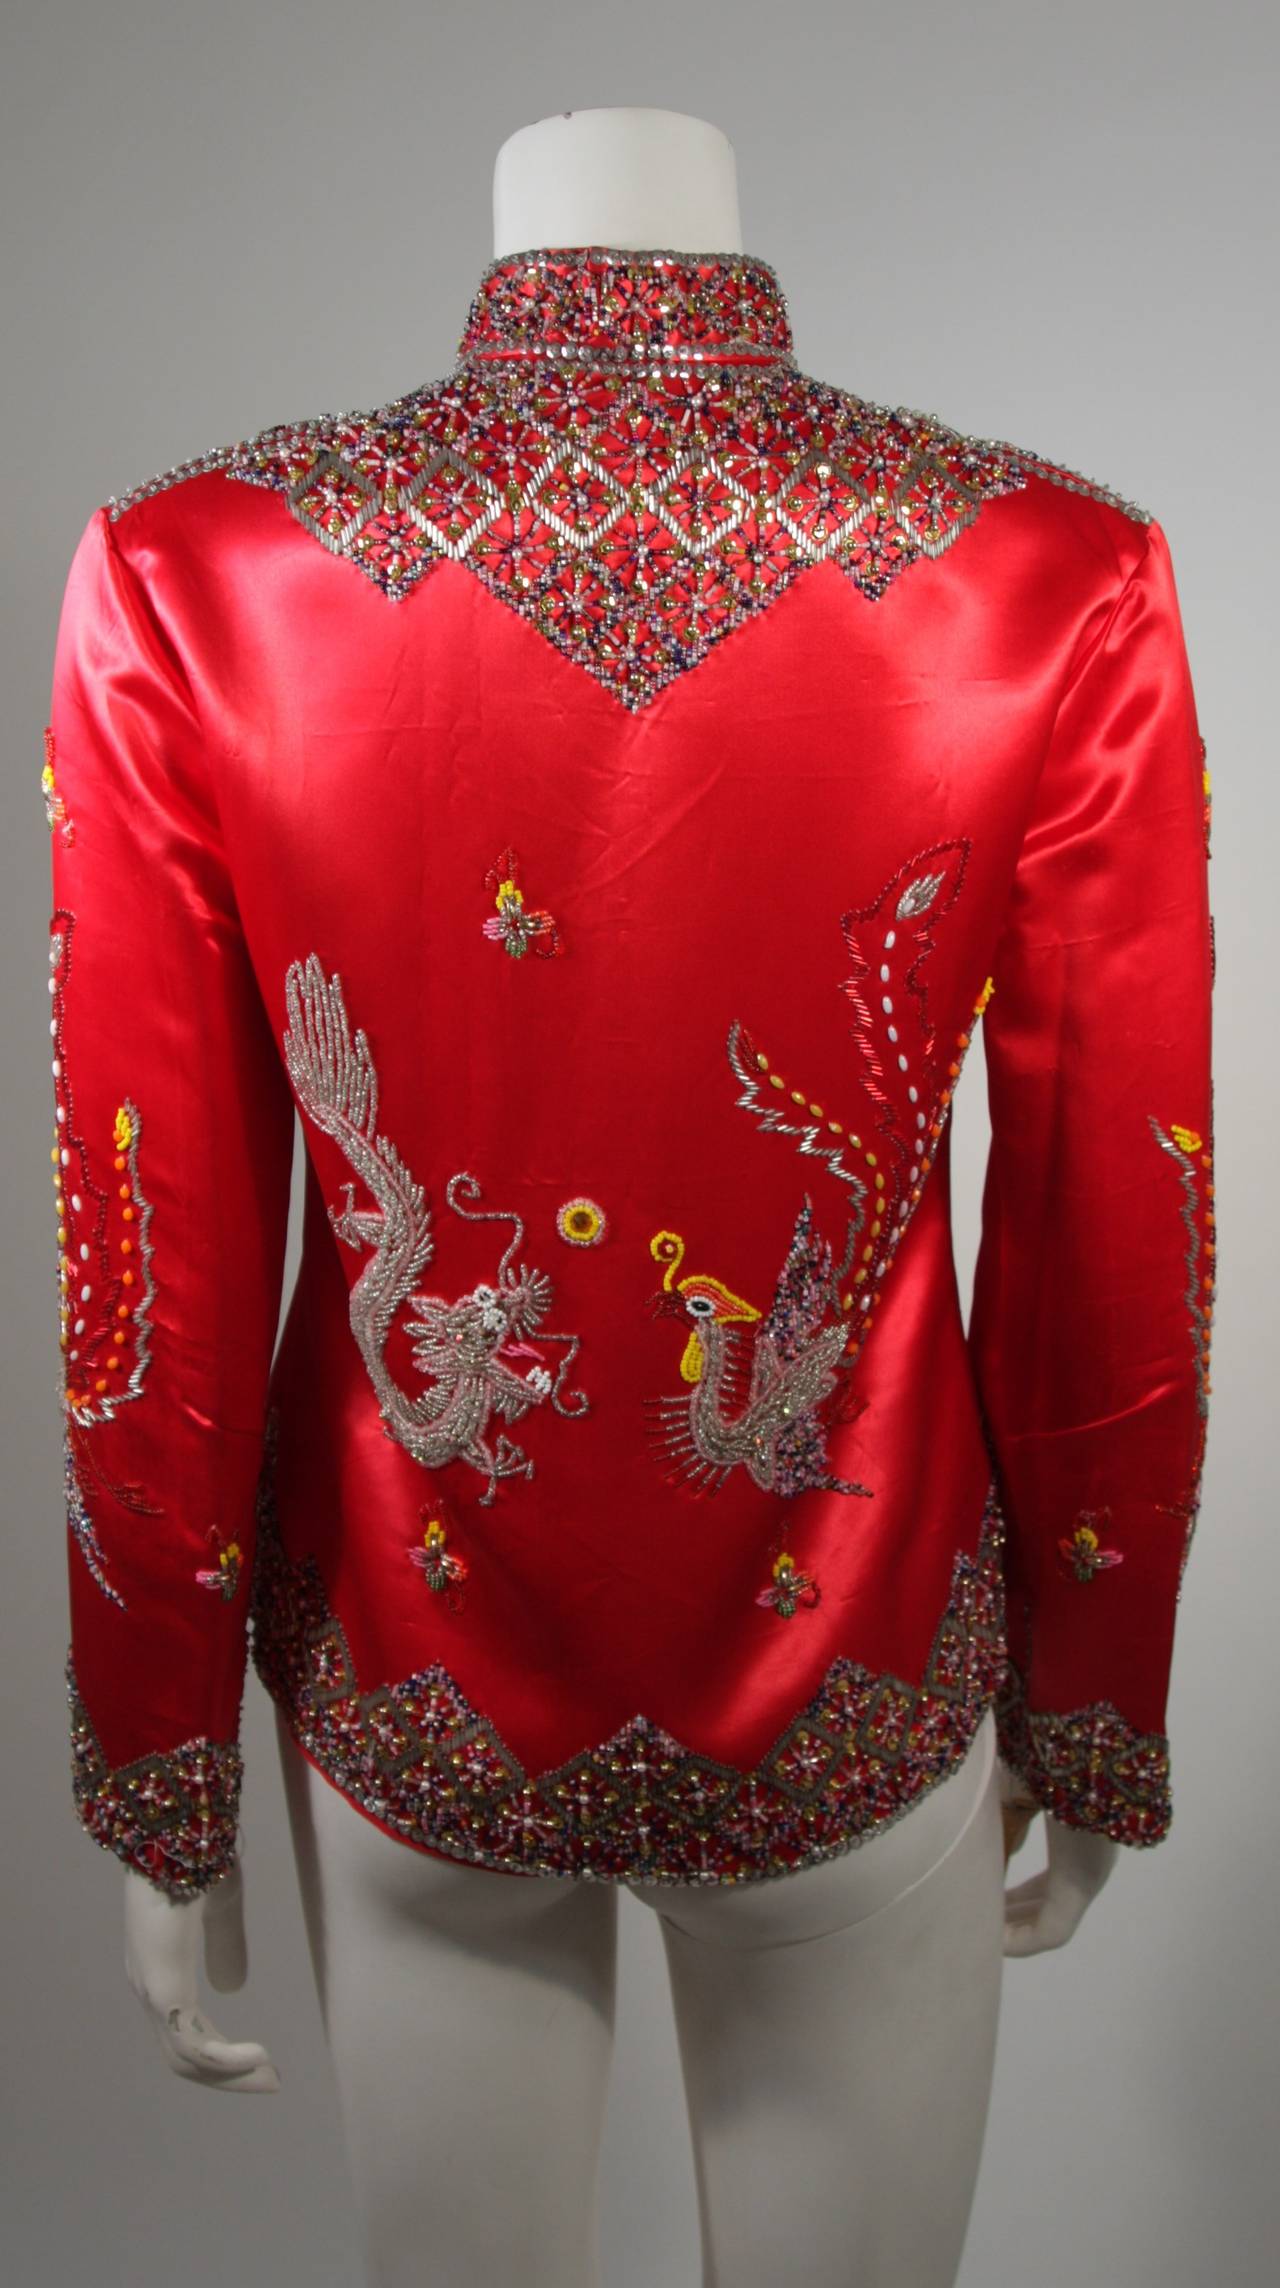 Women's Dynasty For Neiman Marcus Red Silk Hand Beaded Sequined Dragon & Phoenix Jacket For Sale